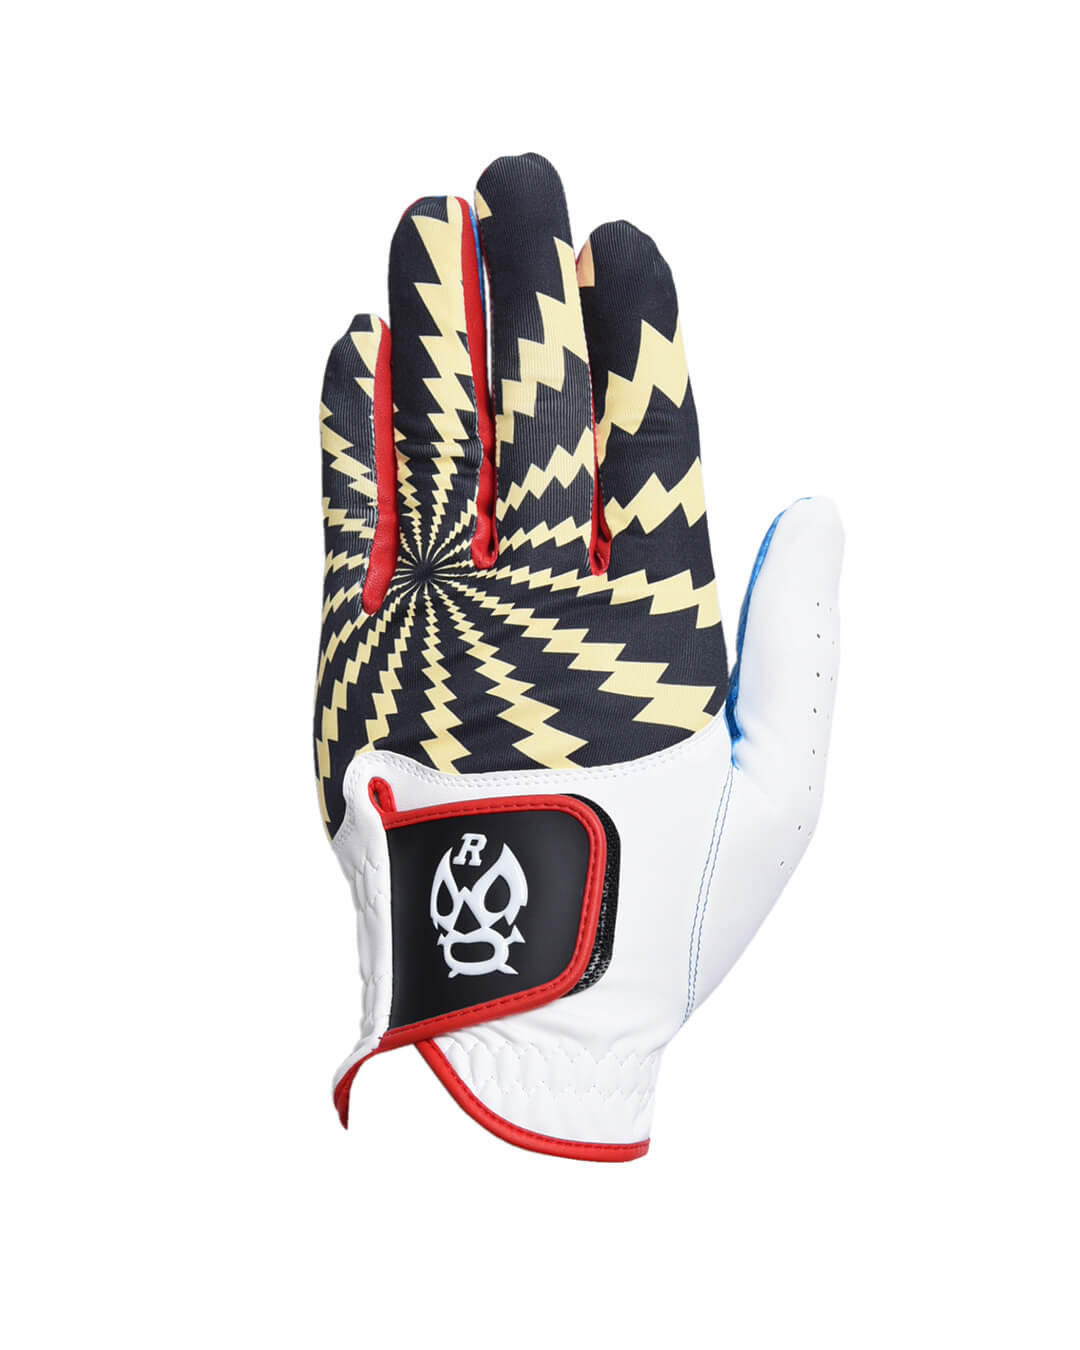 PSYCHEDELIC GLOVE